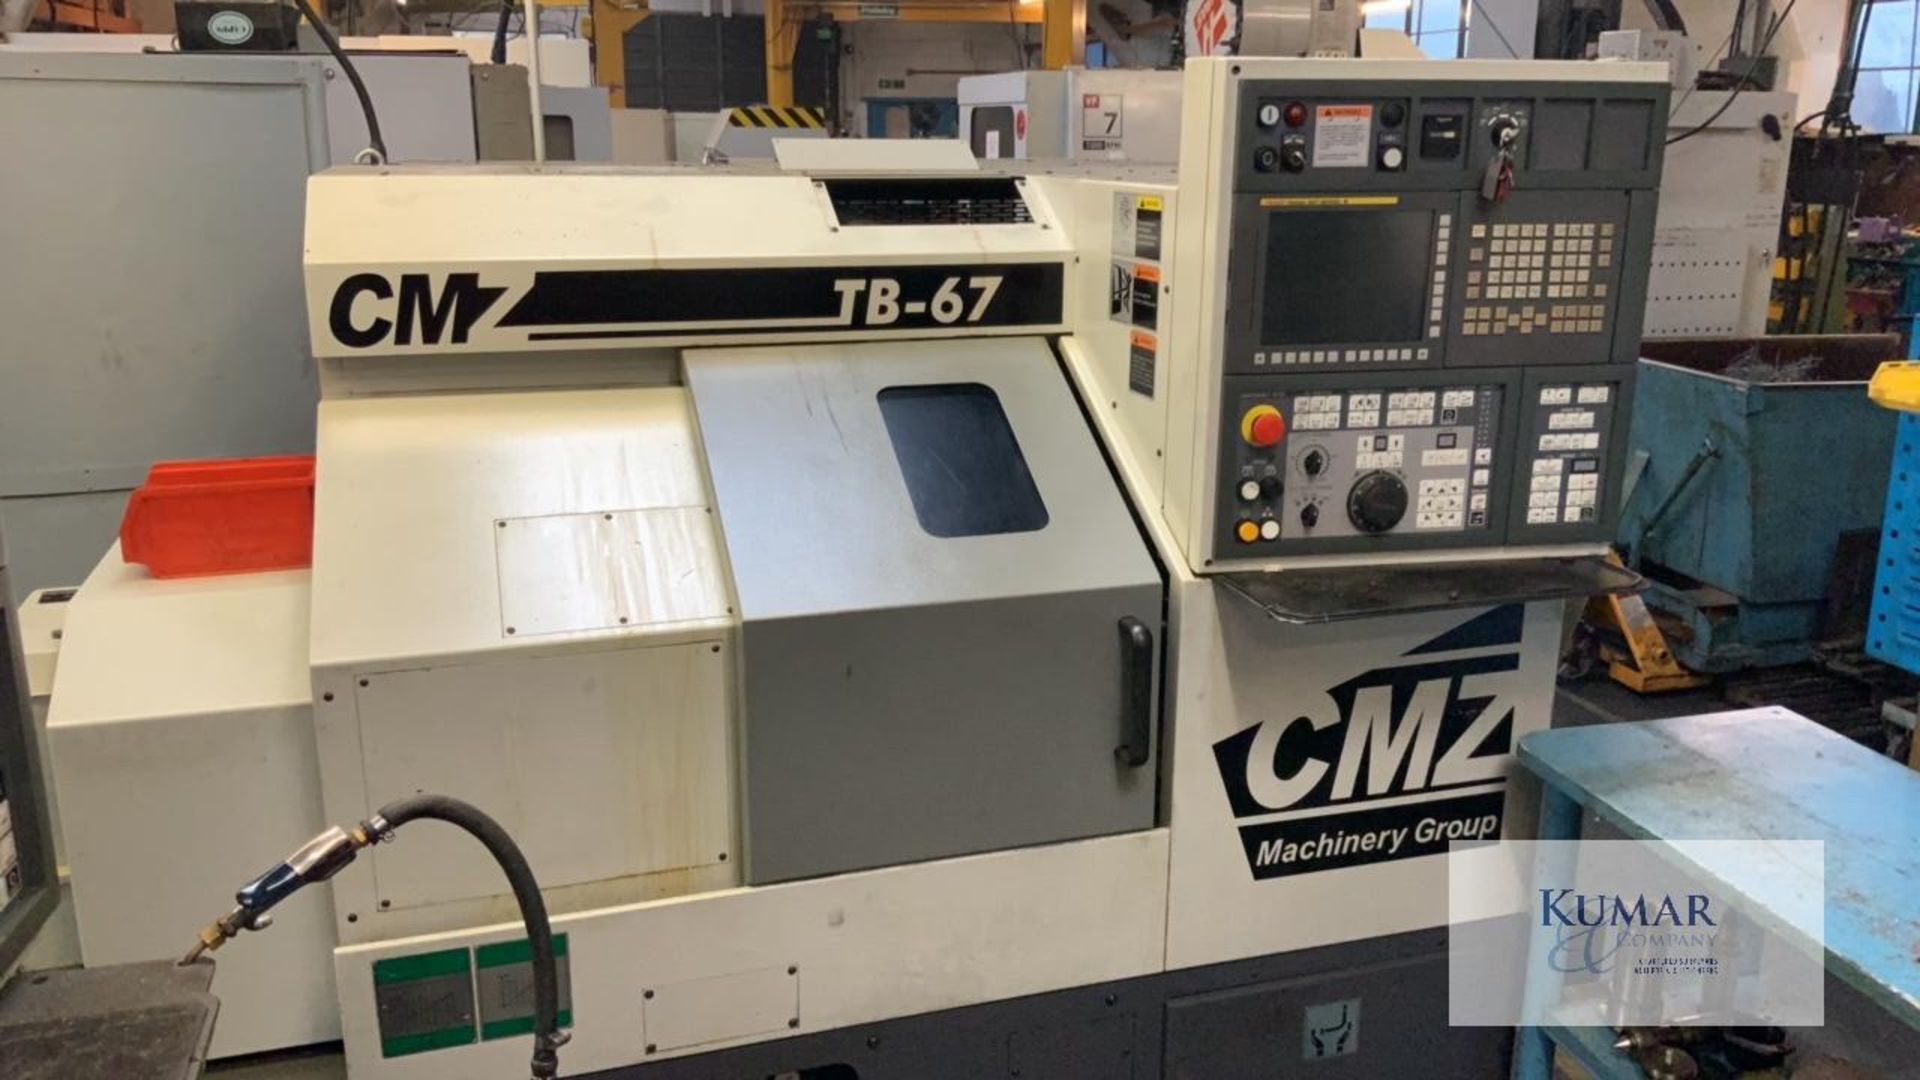 CMZ Model TB 67 CNC Slant Bed Lathe, Serial No TB497 (2013) including tooling and attachments as - Image 2 of 15